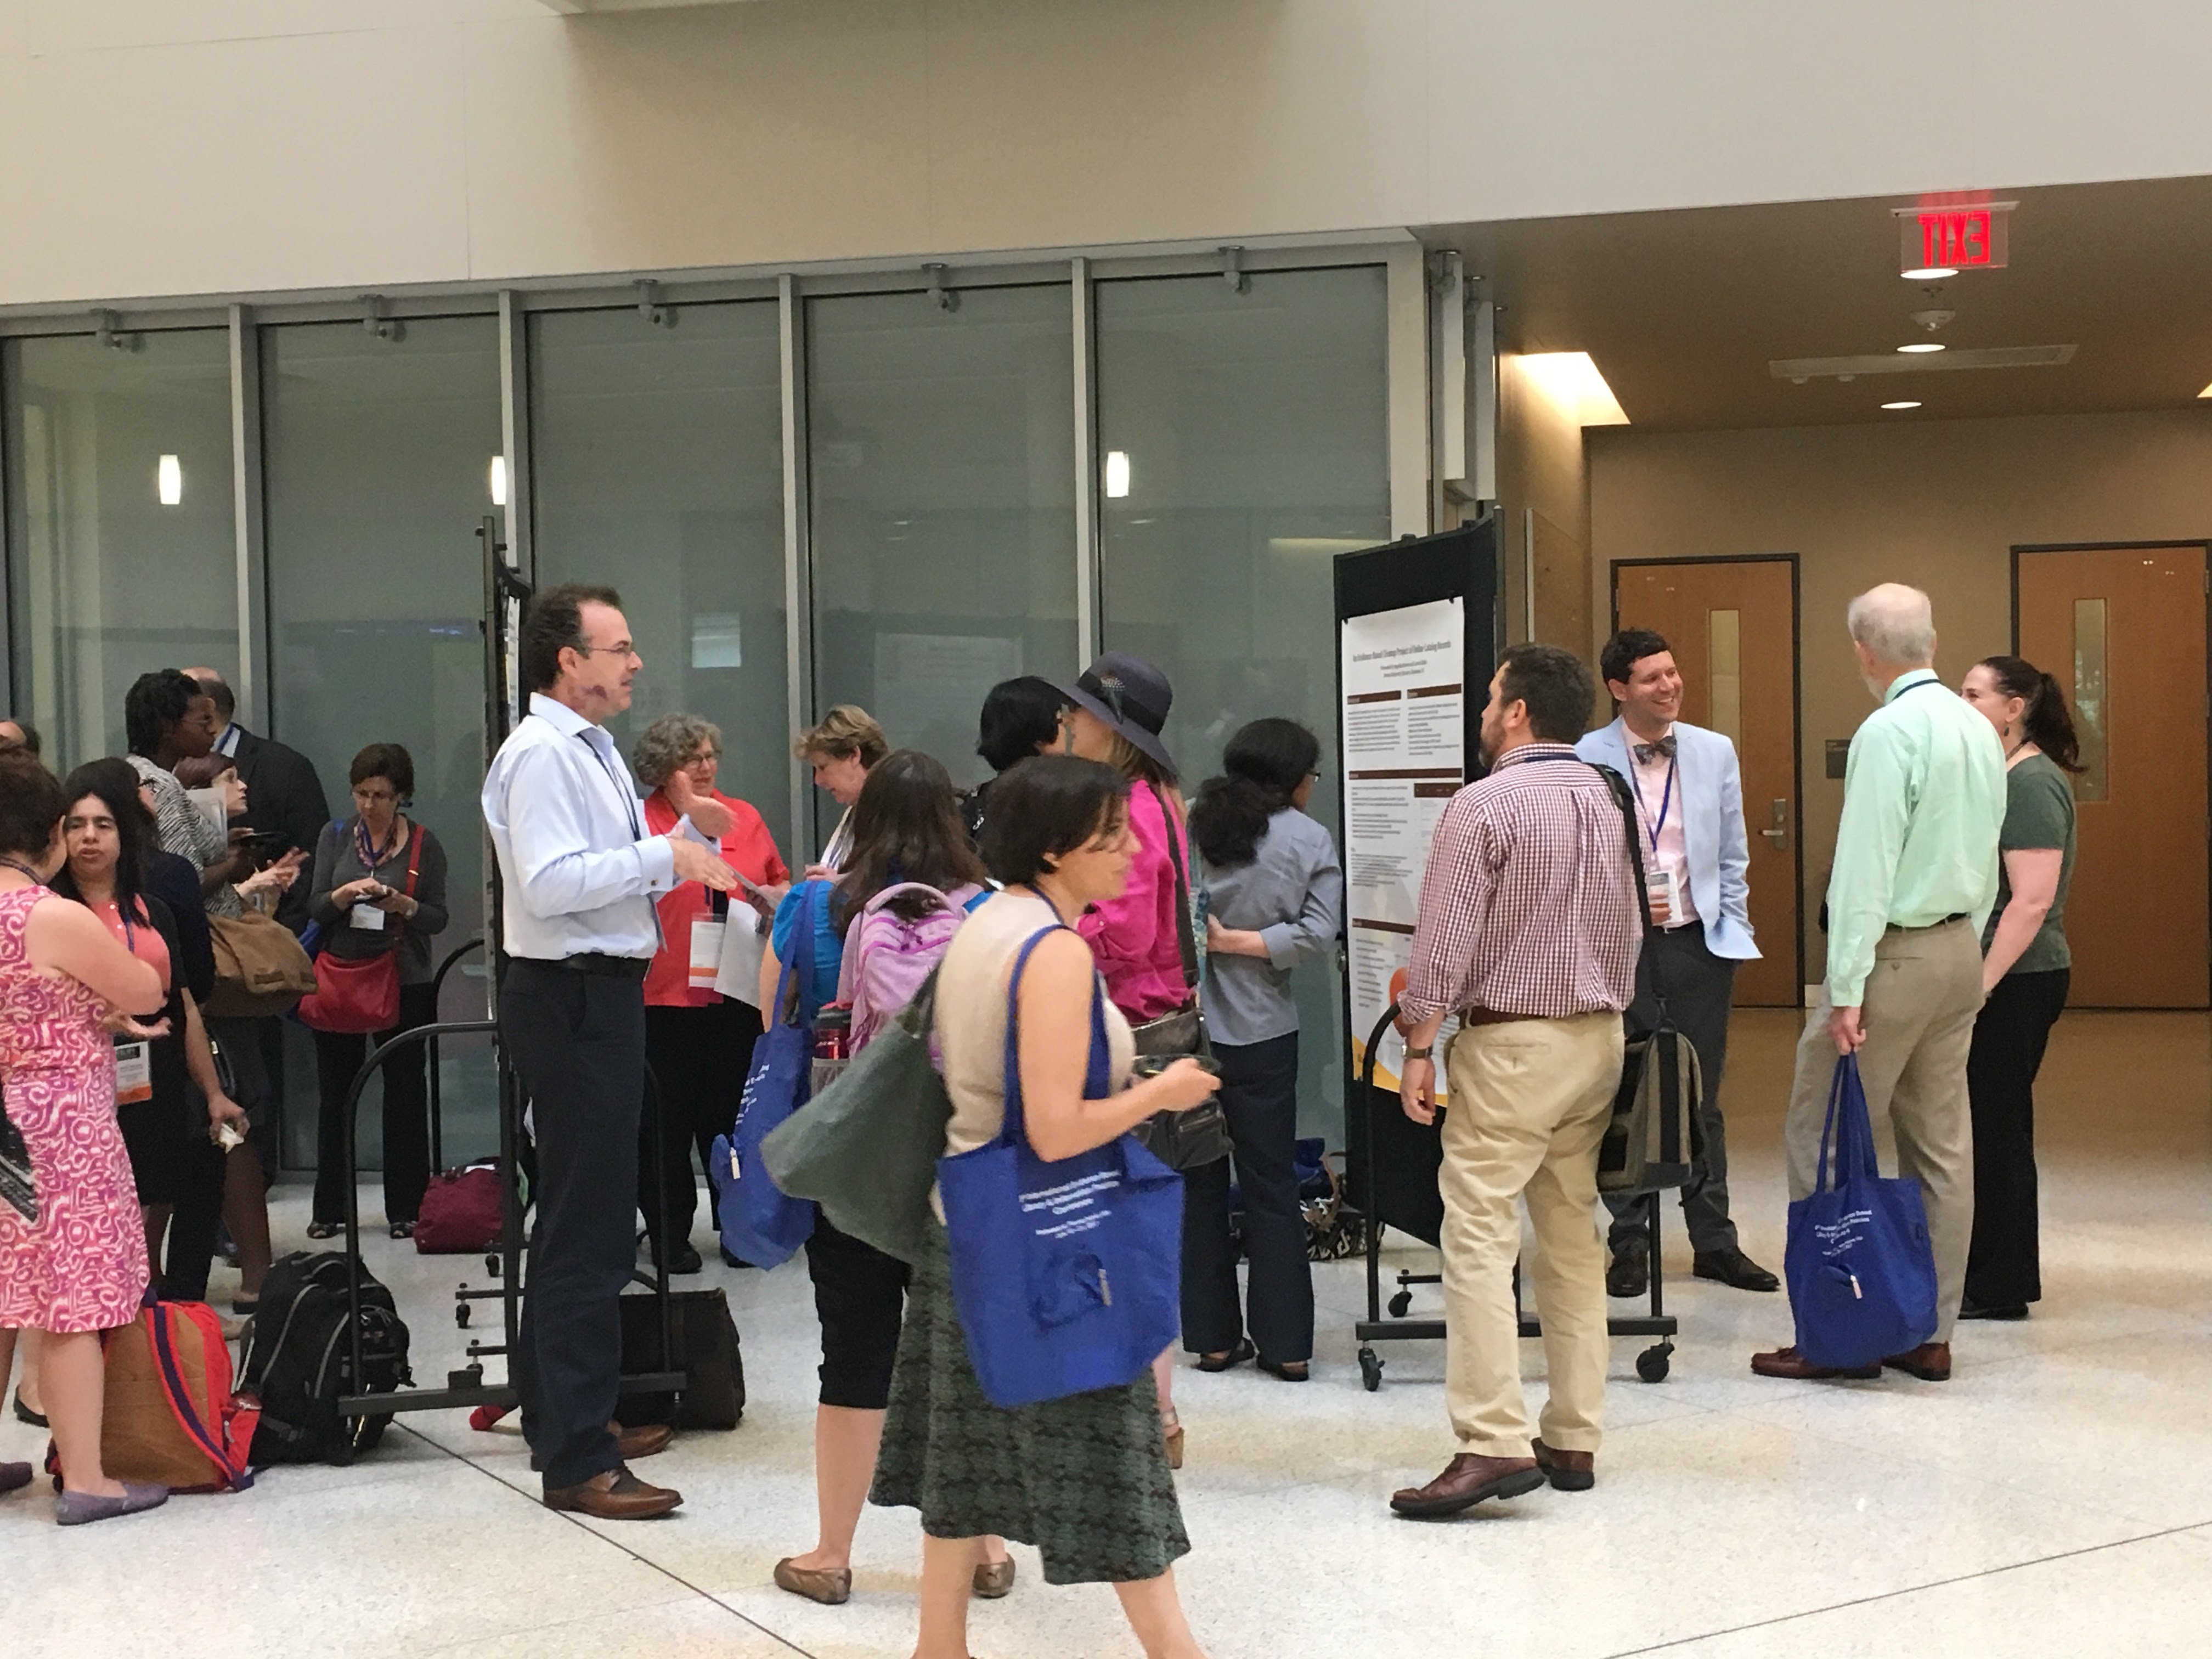 Conference attendees examine poster sessions in the PISB atrium during EBLIP9